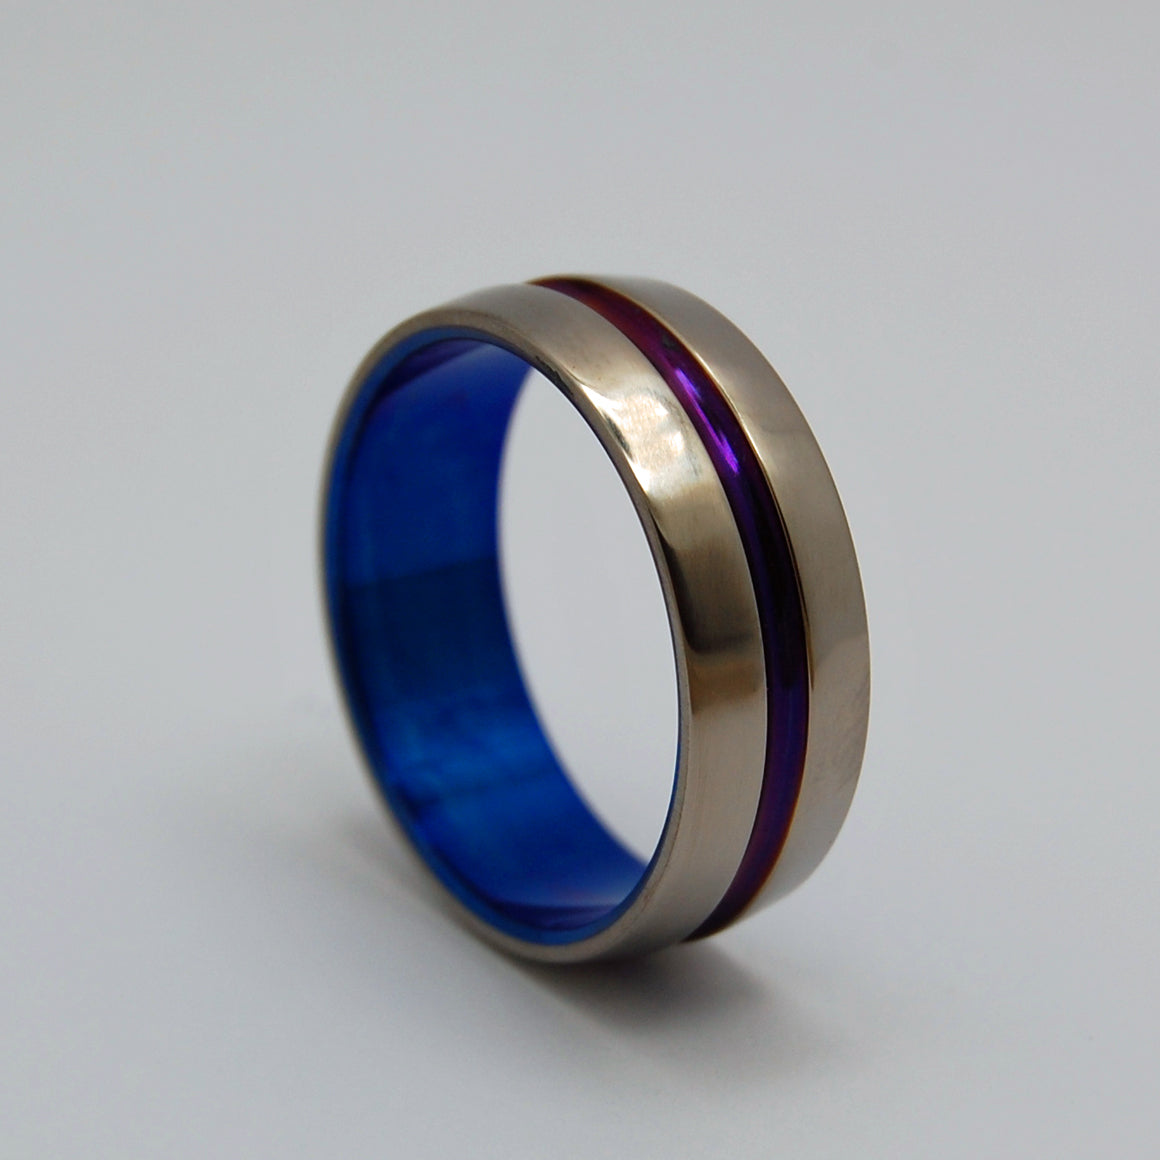 Purple and Blue Signature Ring | Hand Anodized Titanium Wedding Ring - Minter and Richter Designs